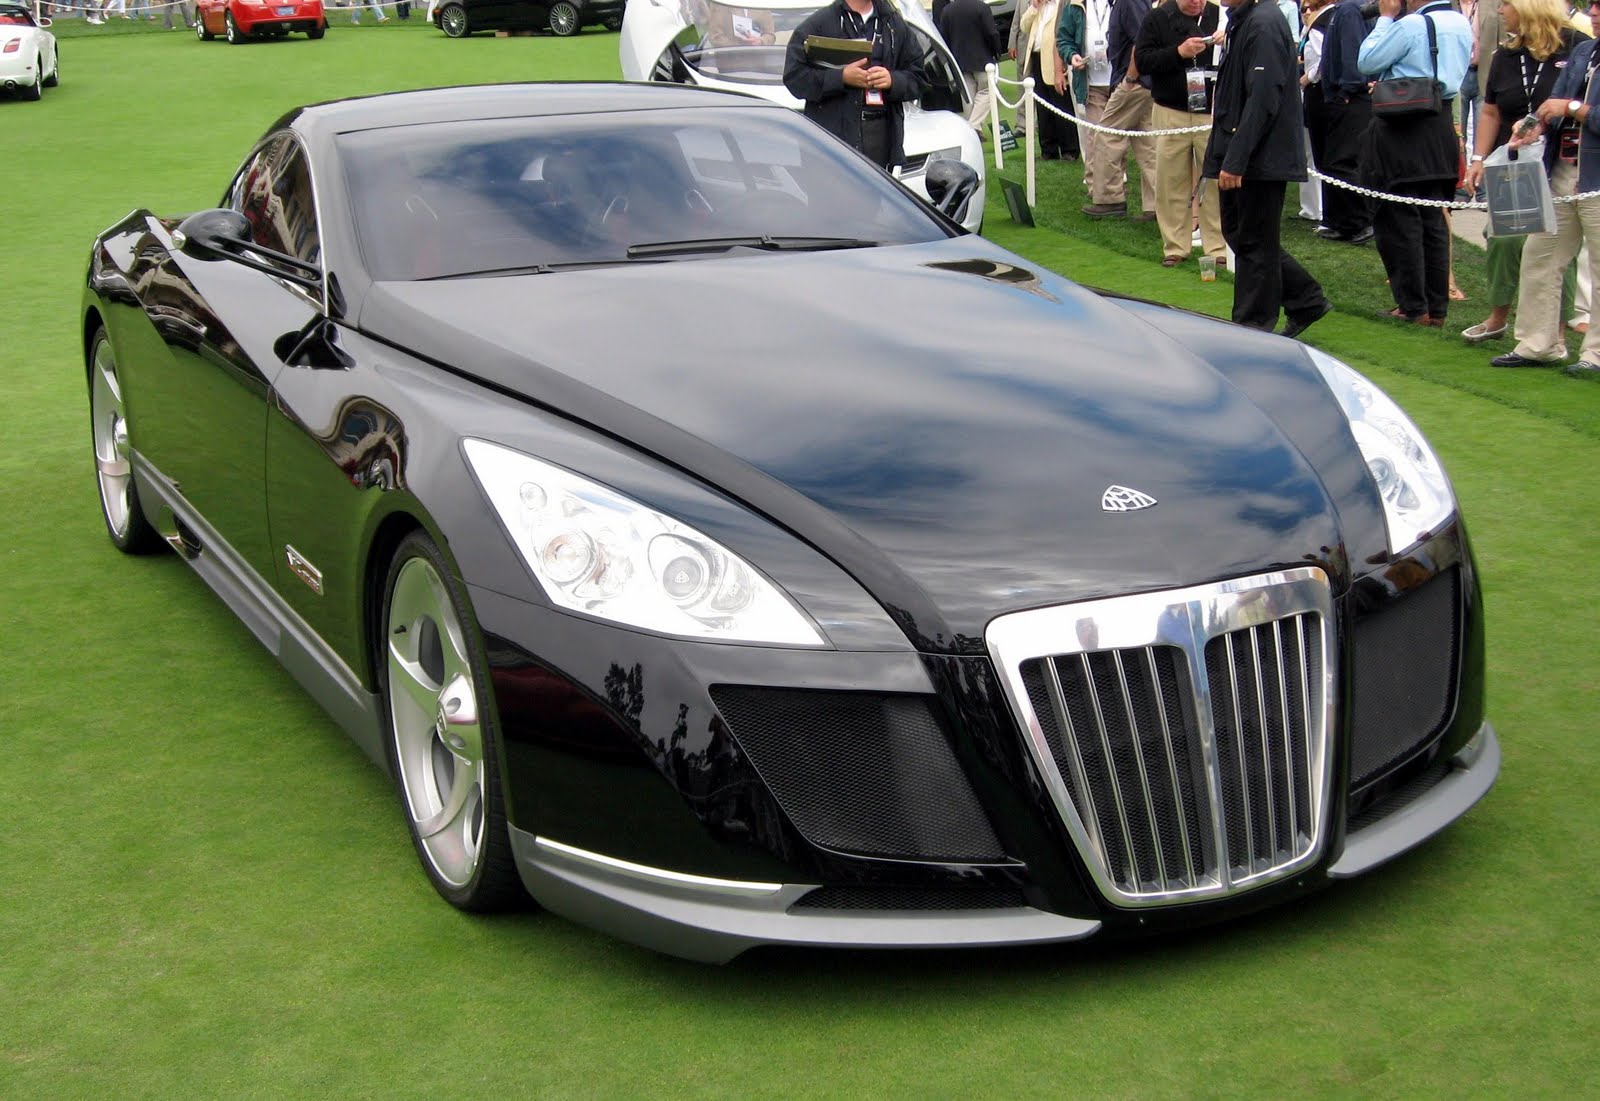 1001Archives: What's the most expensive car in the world?